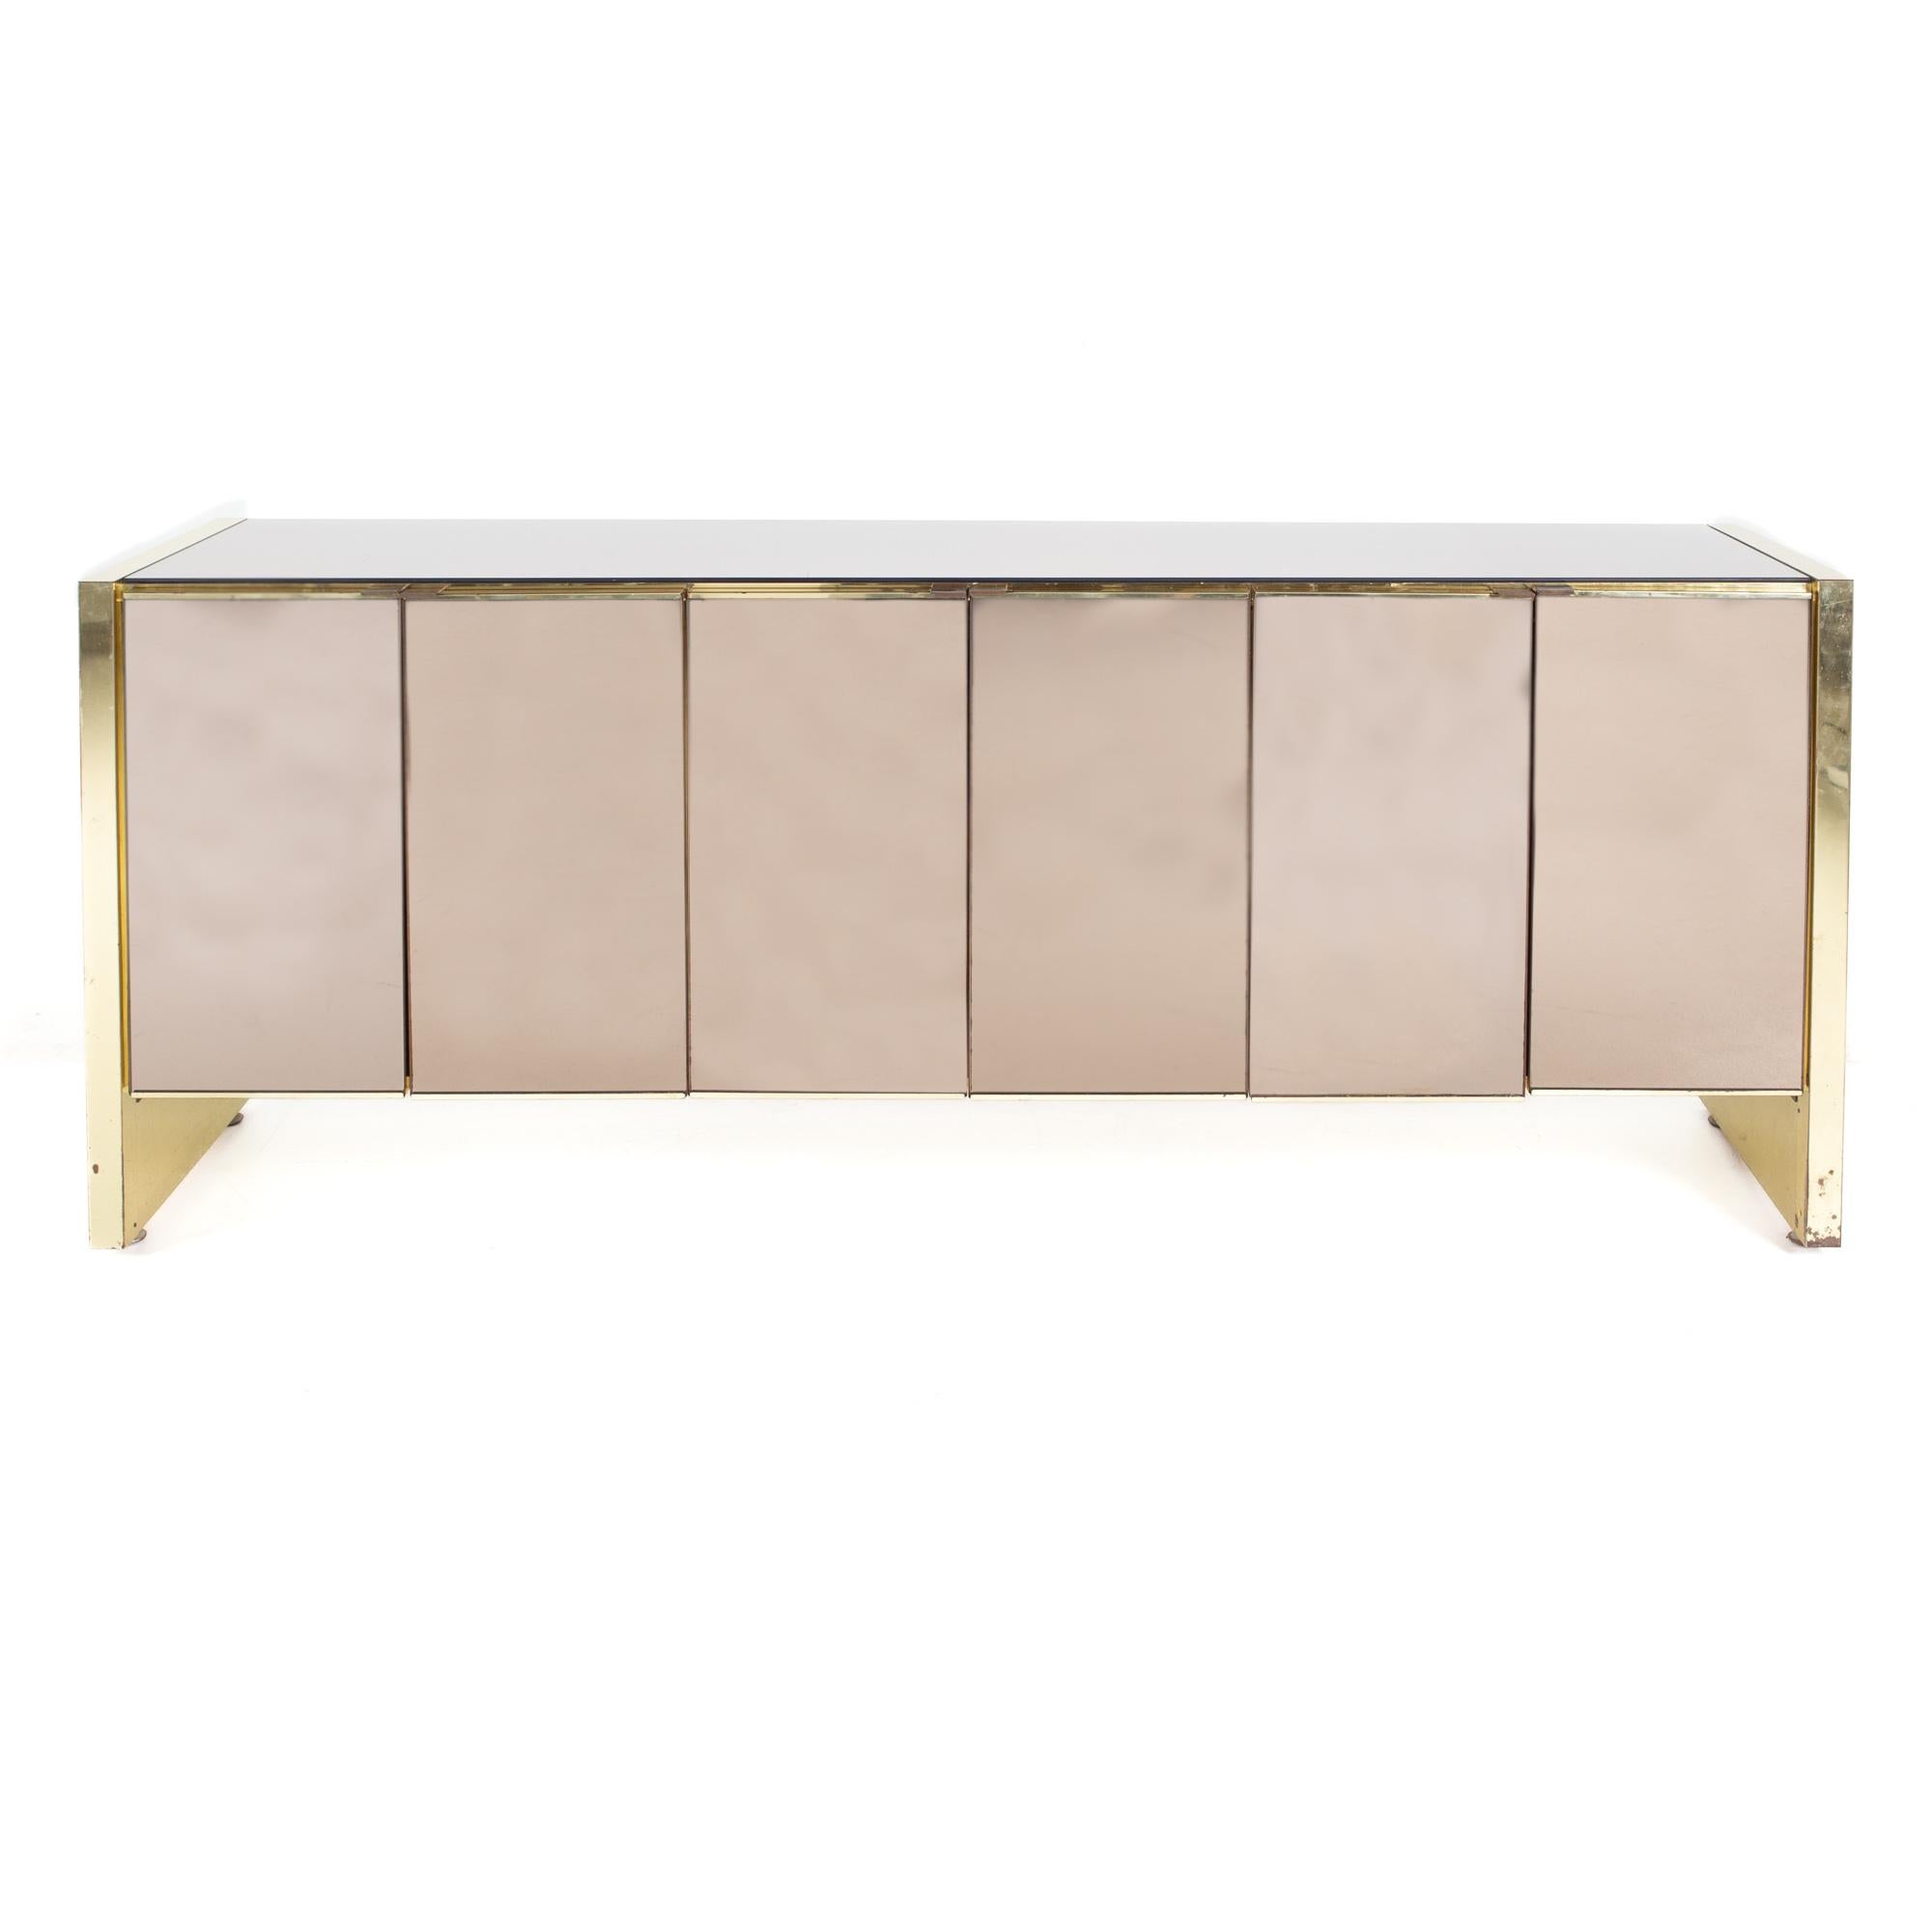 Ello mid century brass and mirrored sideboard credenza

This credenza measures: 75.5 wide x 20.5 deep x 29.5 inches high

All pieces of furniture can be had in what we call restored vintage condition. That means the piece is restored upon